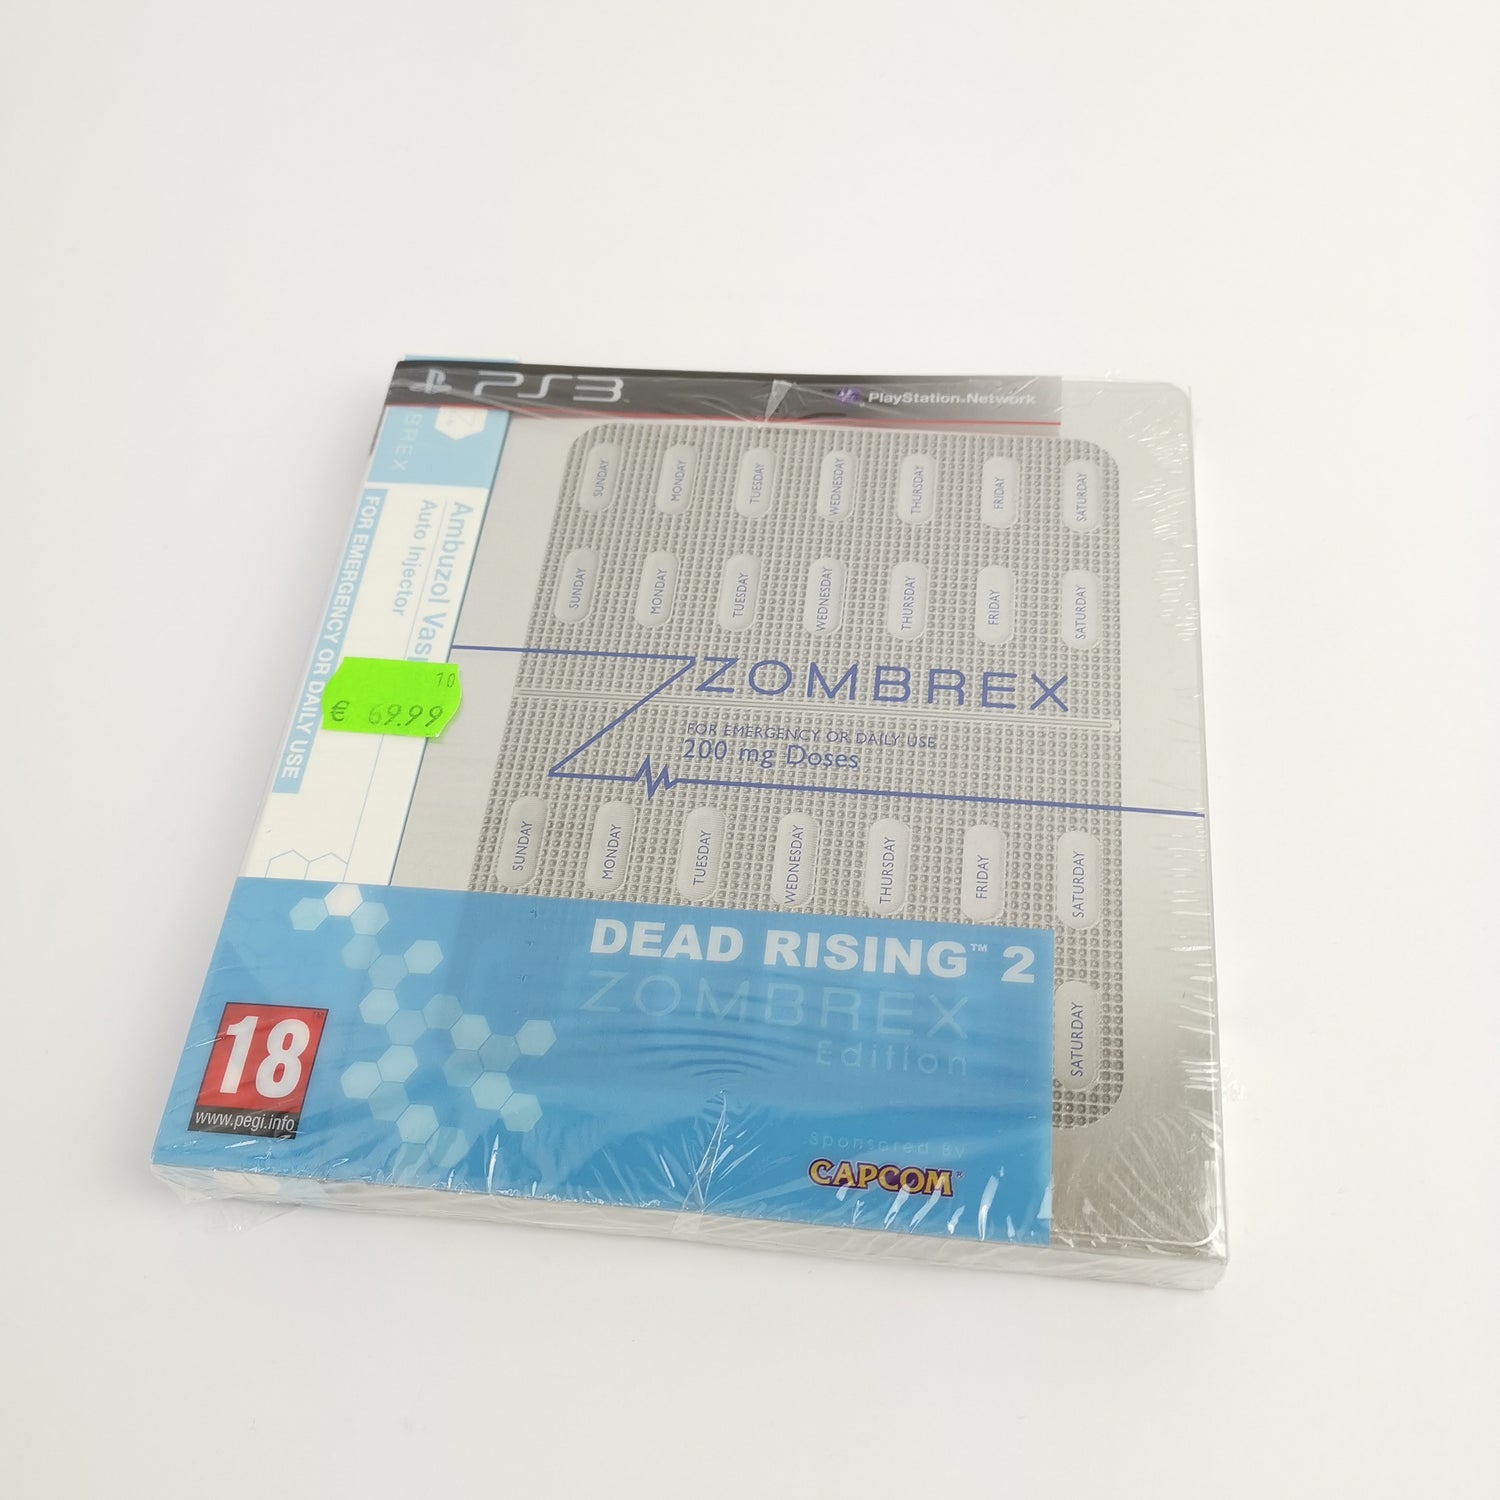 Sony Playstation 3 Game : Dead Rising 2 Zombrex Edition | PS3 Game - OVP USK18